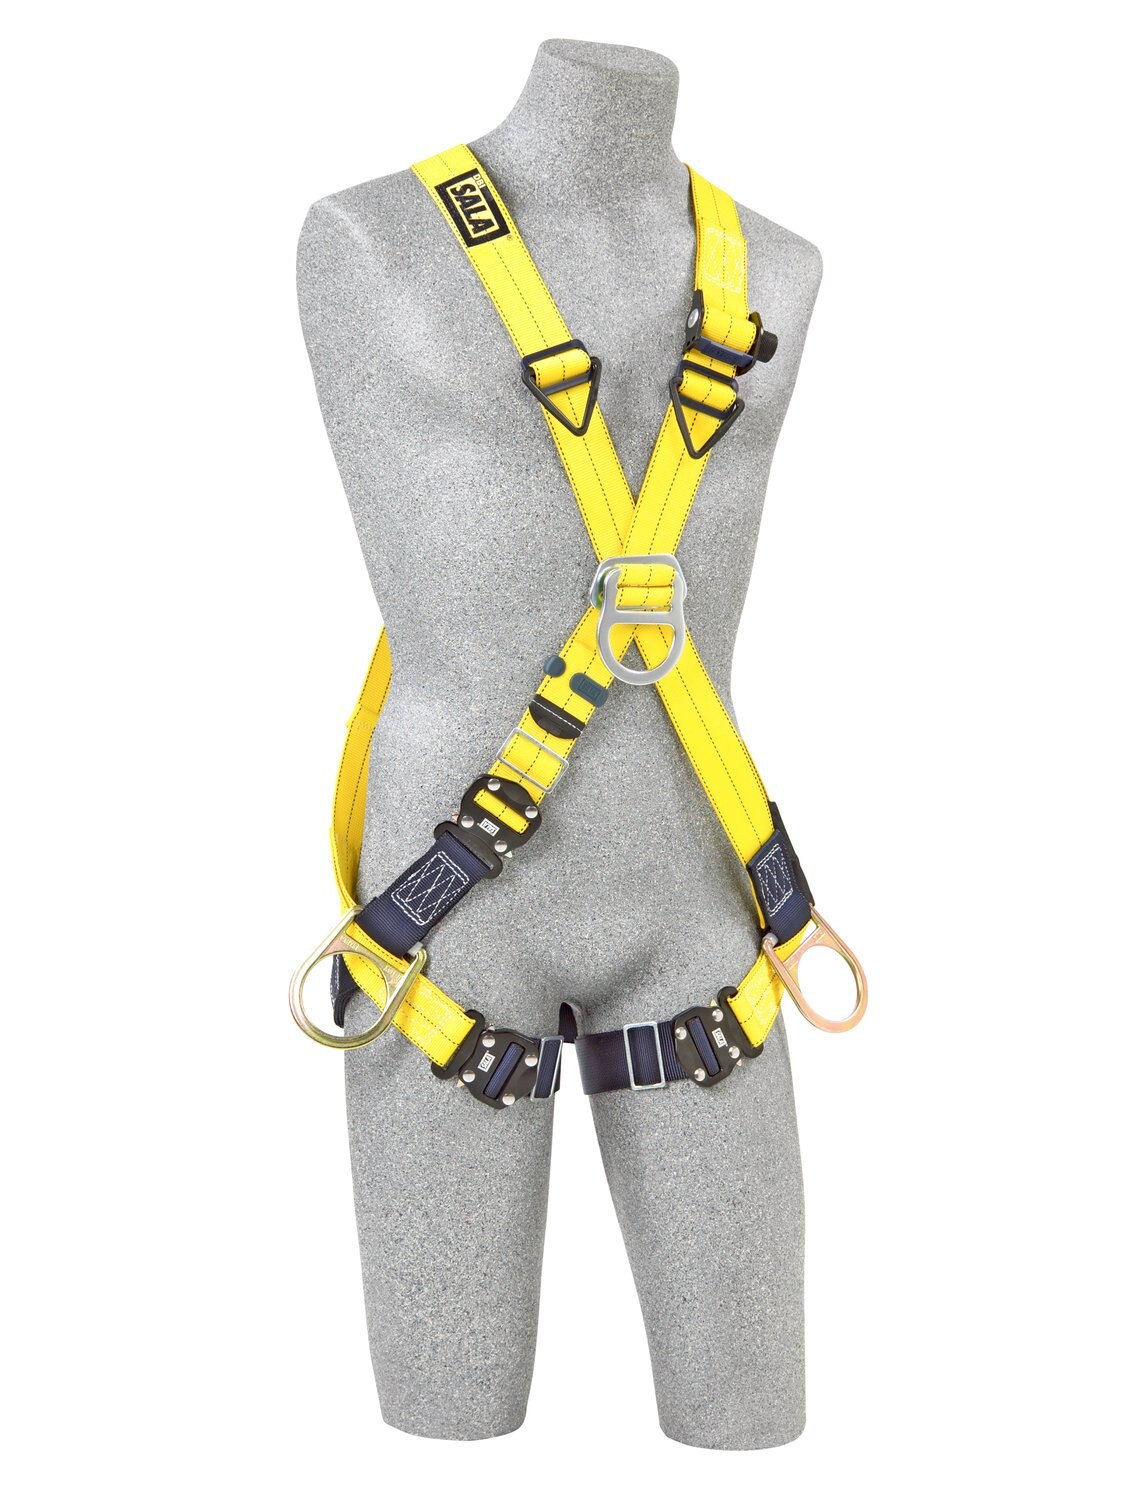 7012815752 - 3M DBI-SALA Delta Cross-Over Climbing/Positioning Safety Harness 1110727, X-Large